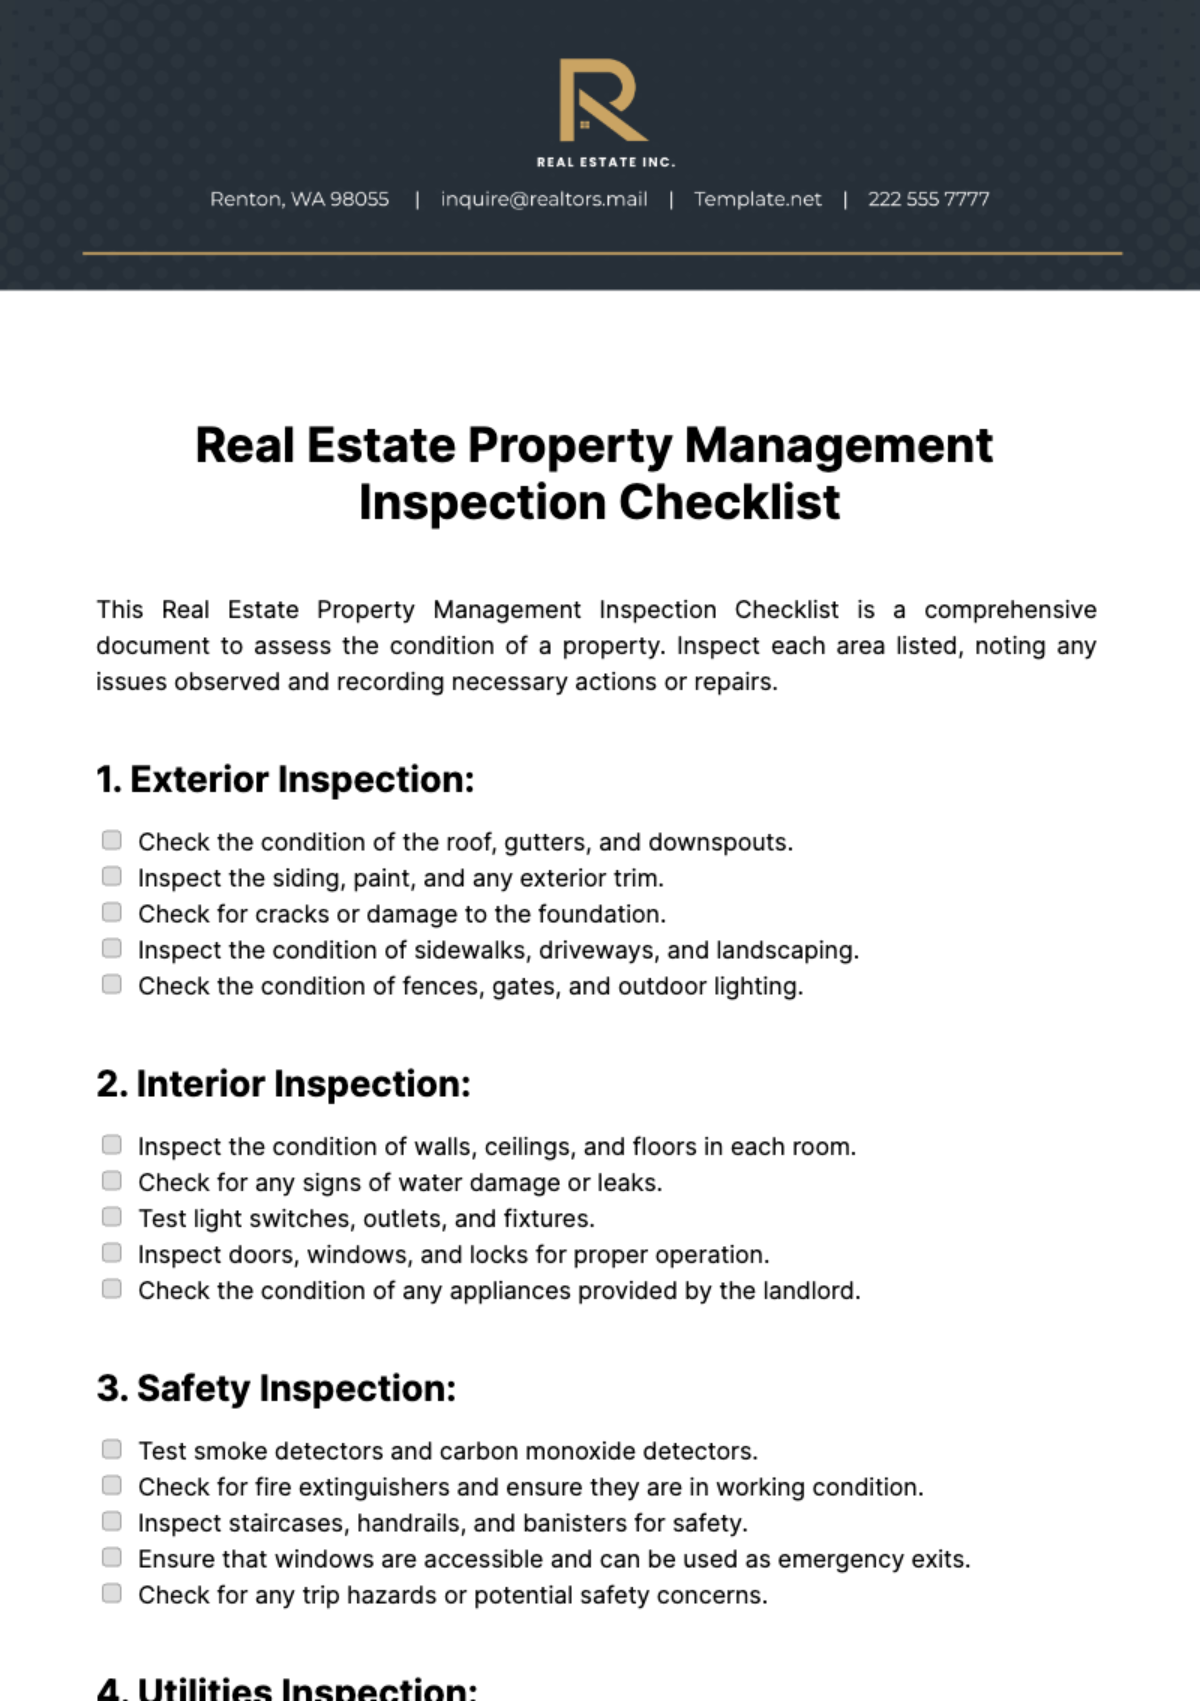 Real Estate Property Management Inspection Checklist Template